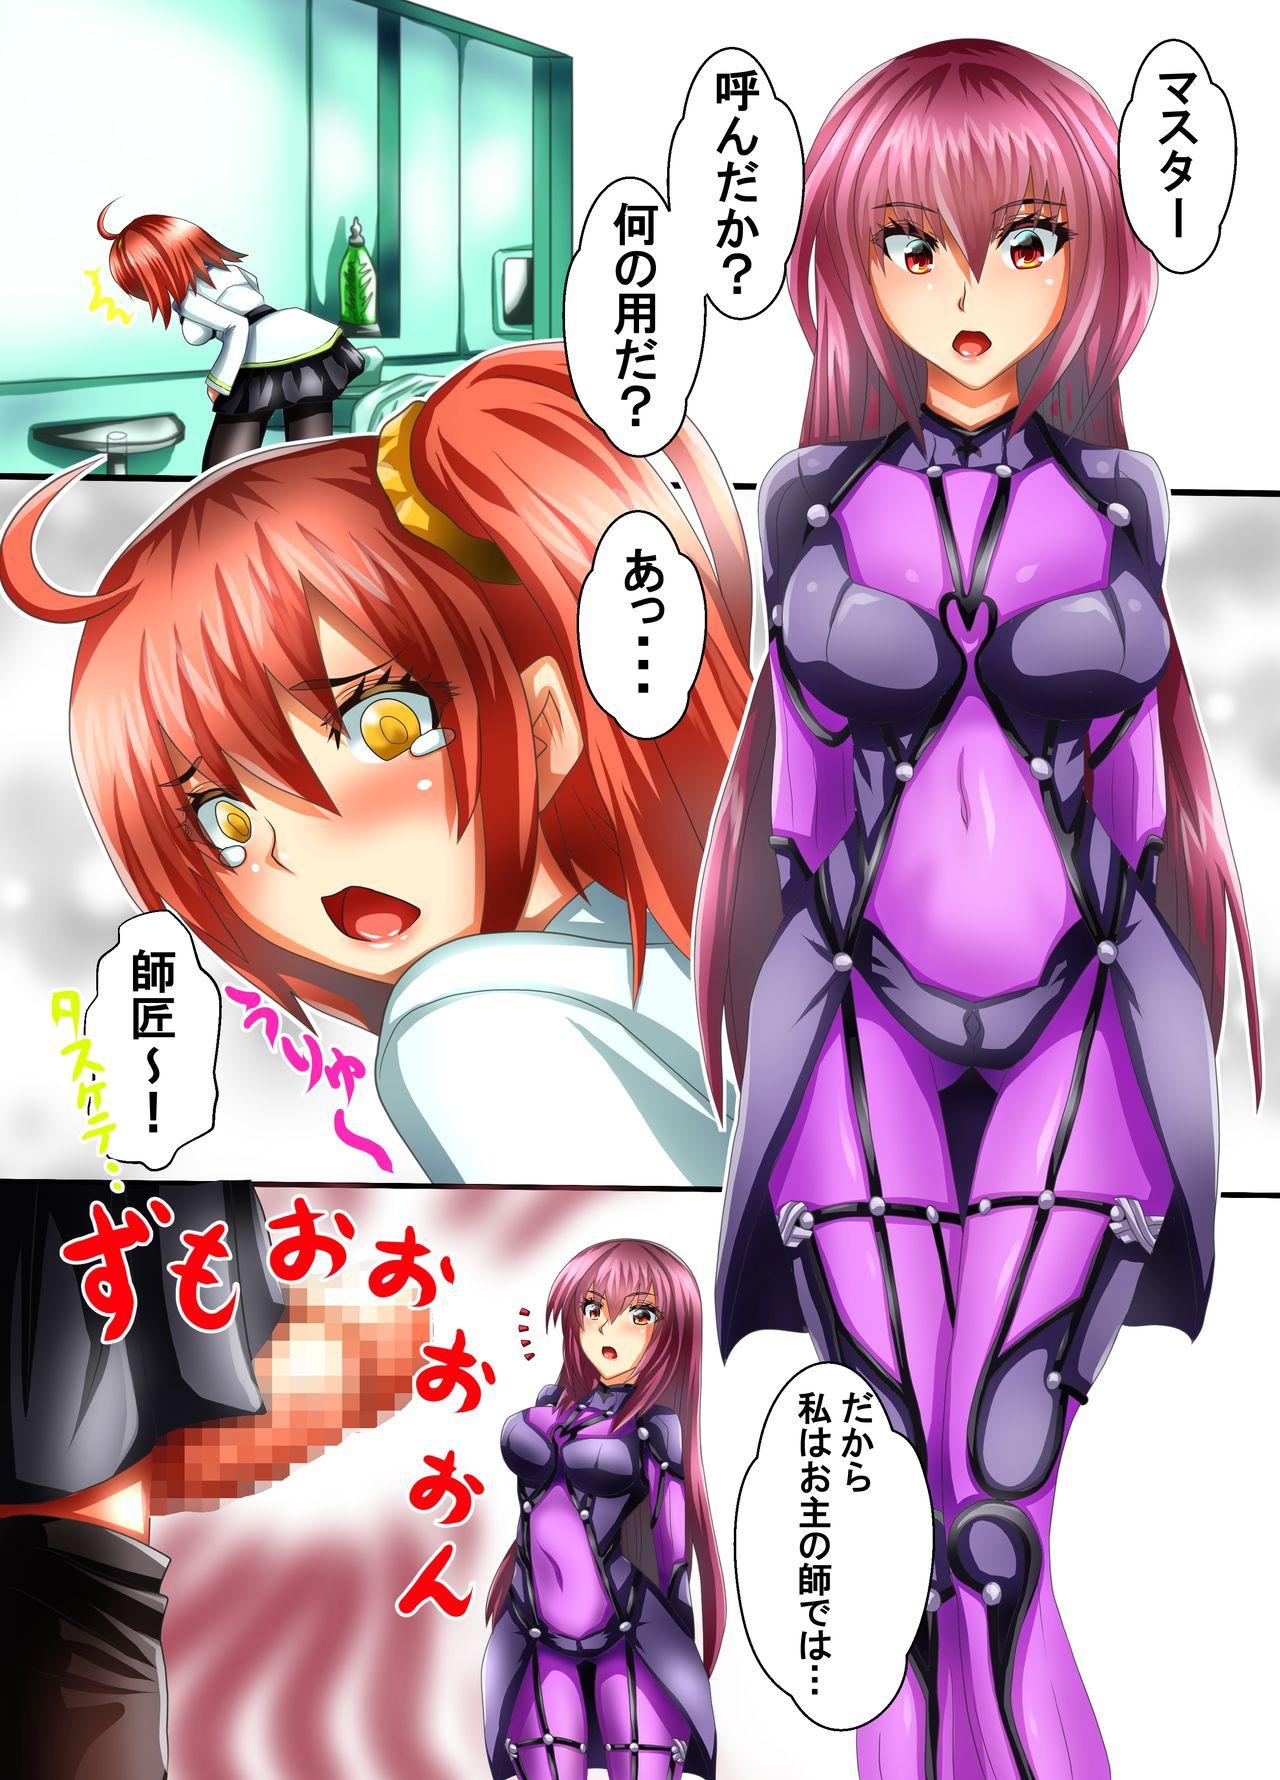 Top DUAL GAME #9 - Fate grand order Erotica - Page 5